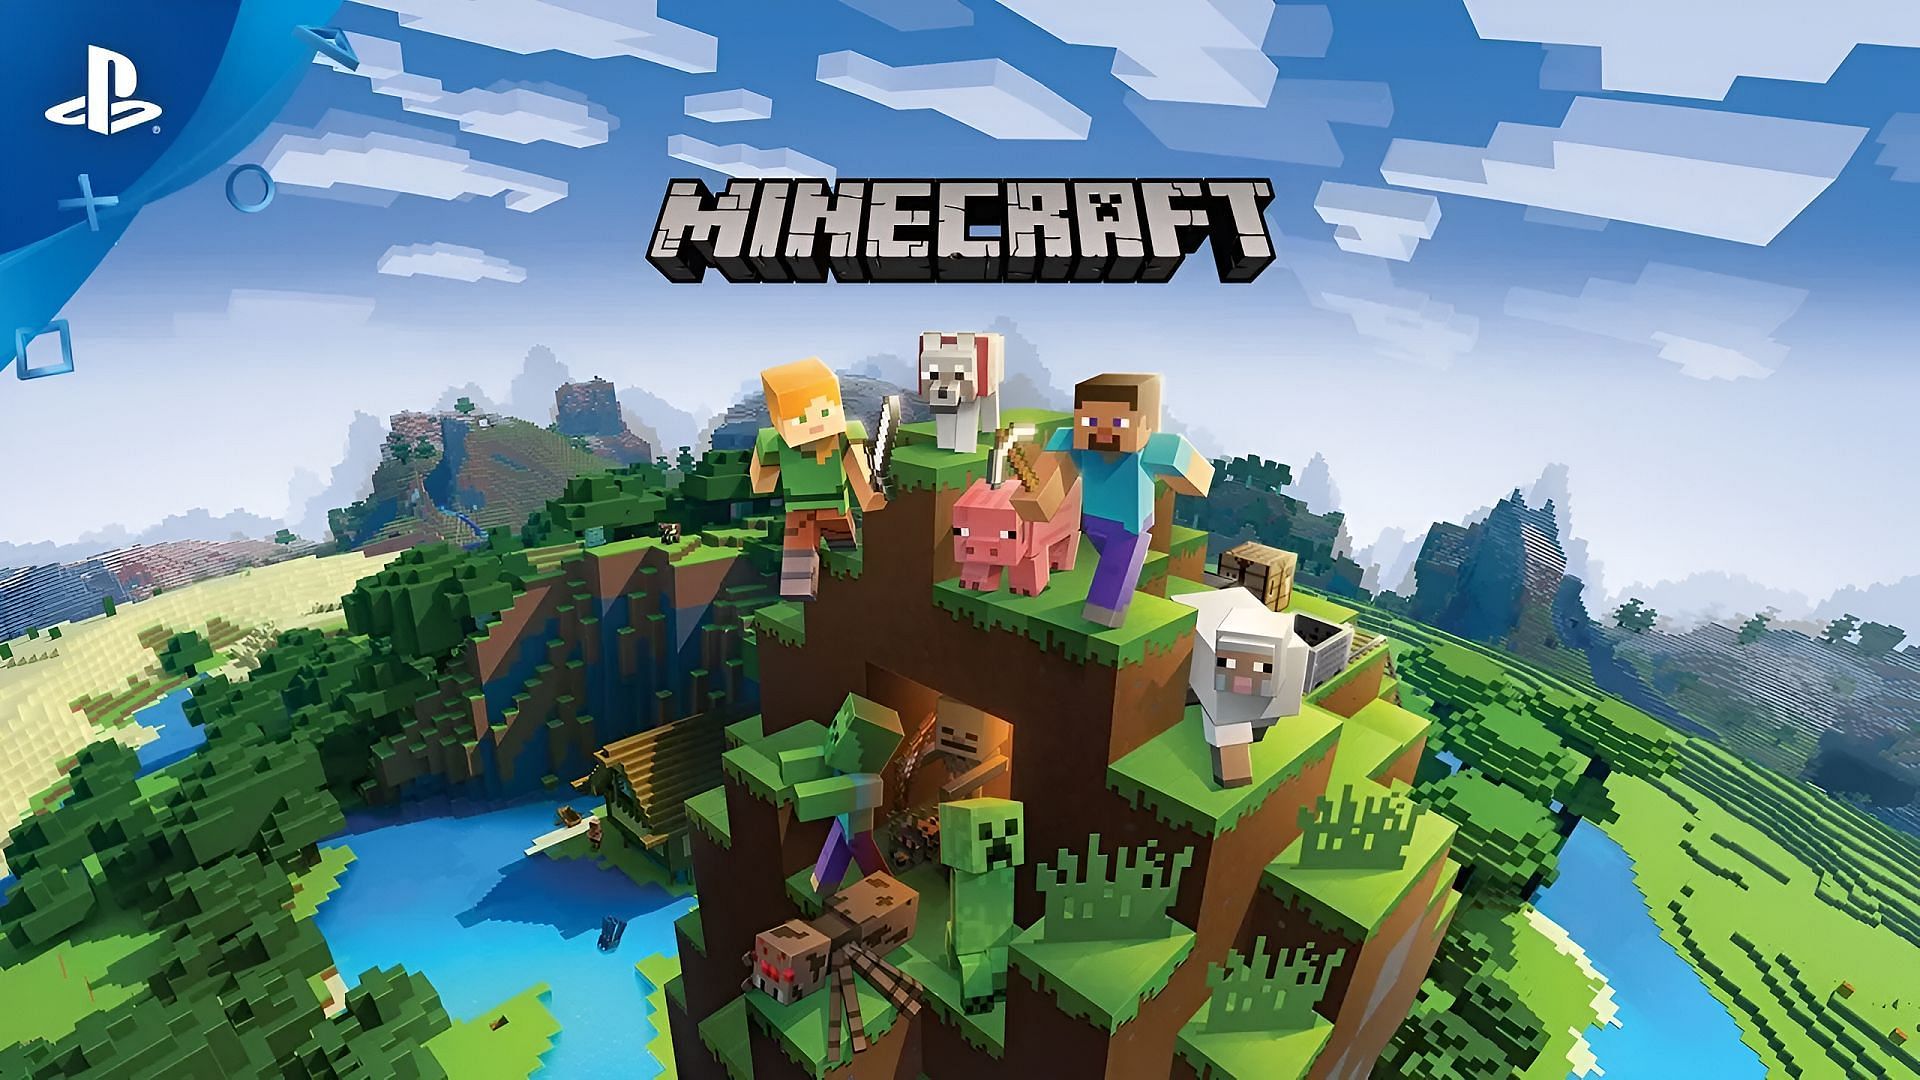 PlayStation fans can update Minecraft much like they would on Xbox or Nintendo Switch (Image via Mojang/Sony)